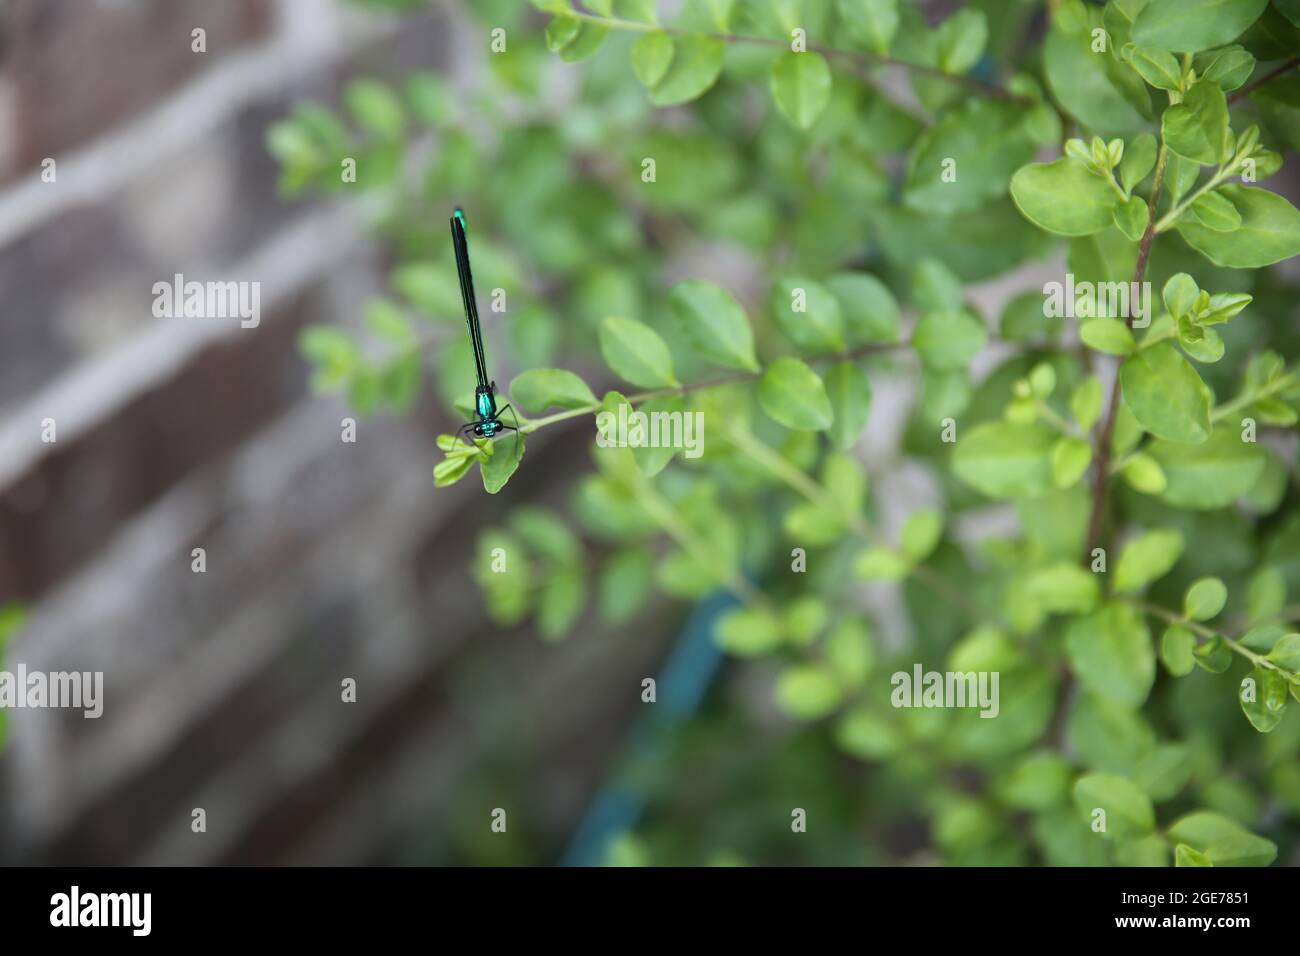 selective focus of a green damselfly on a tree branch in the garden Stock Photo